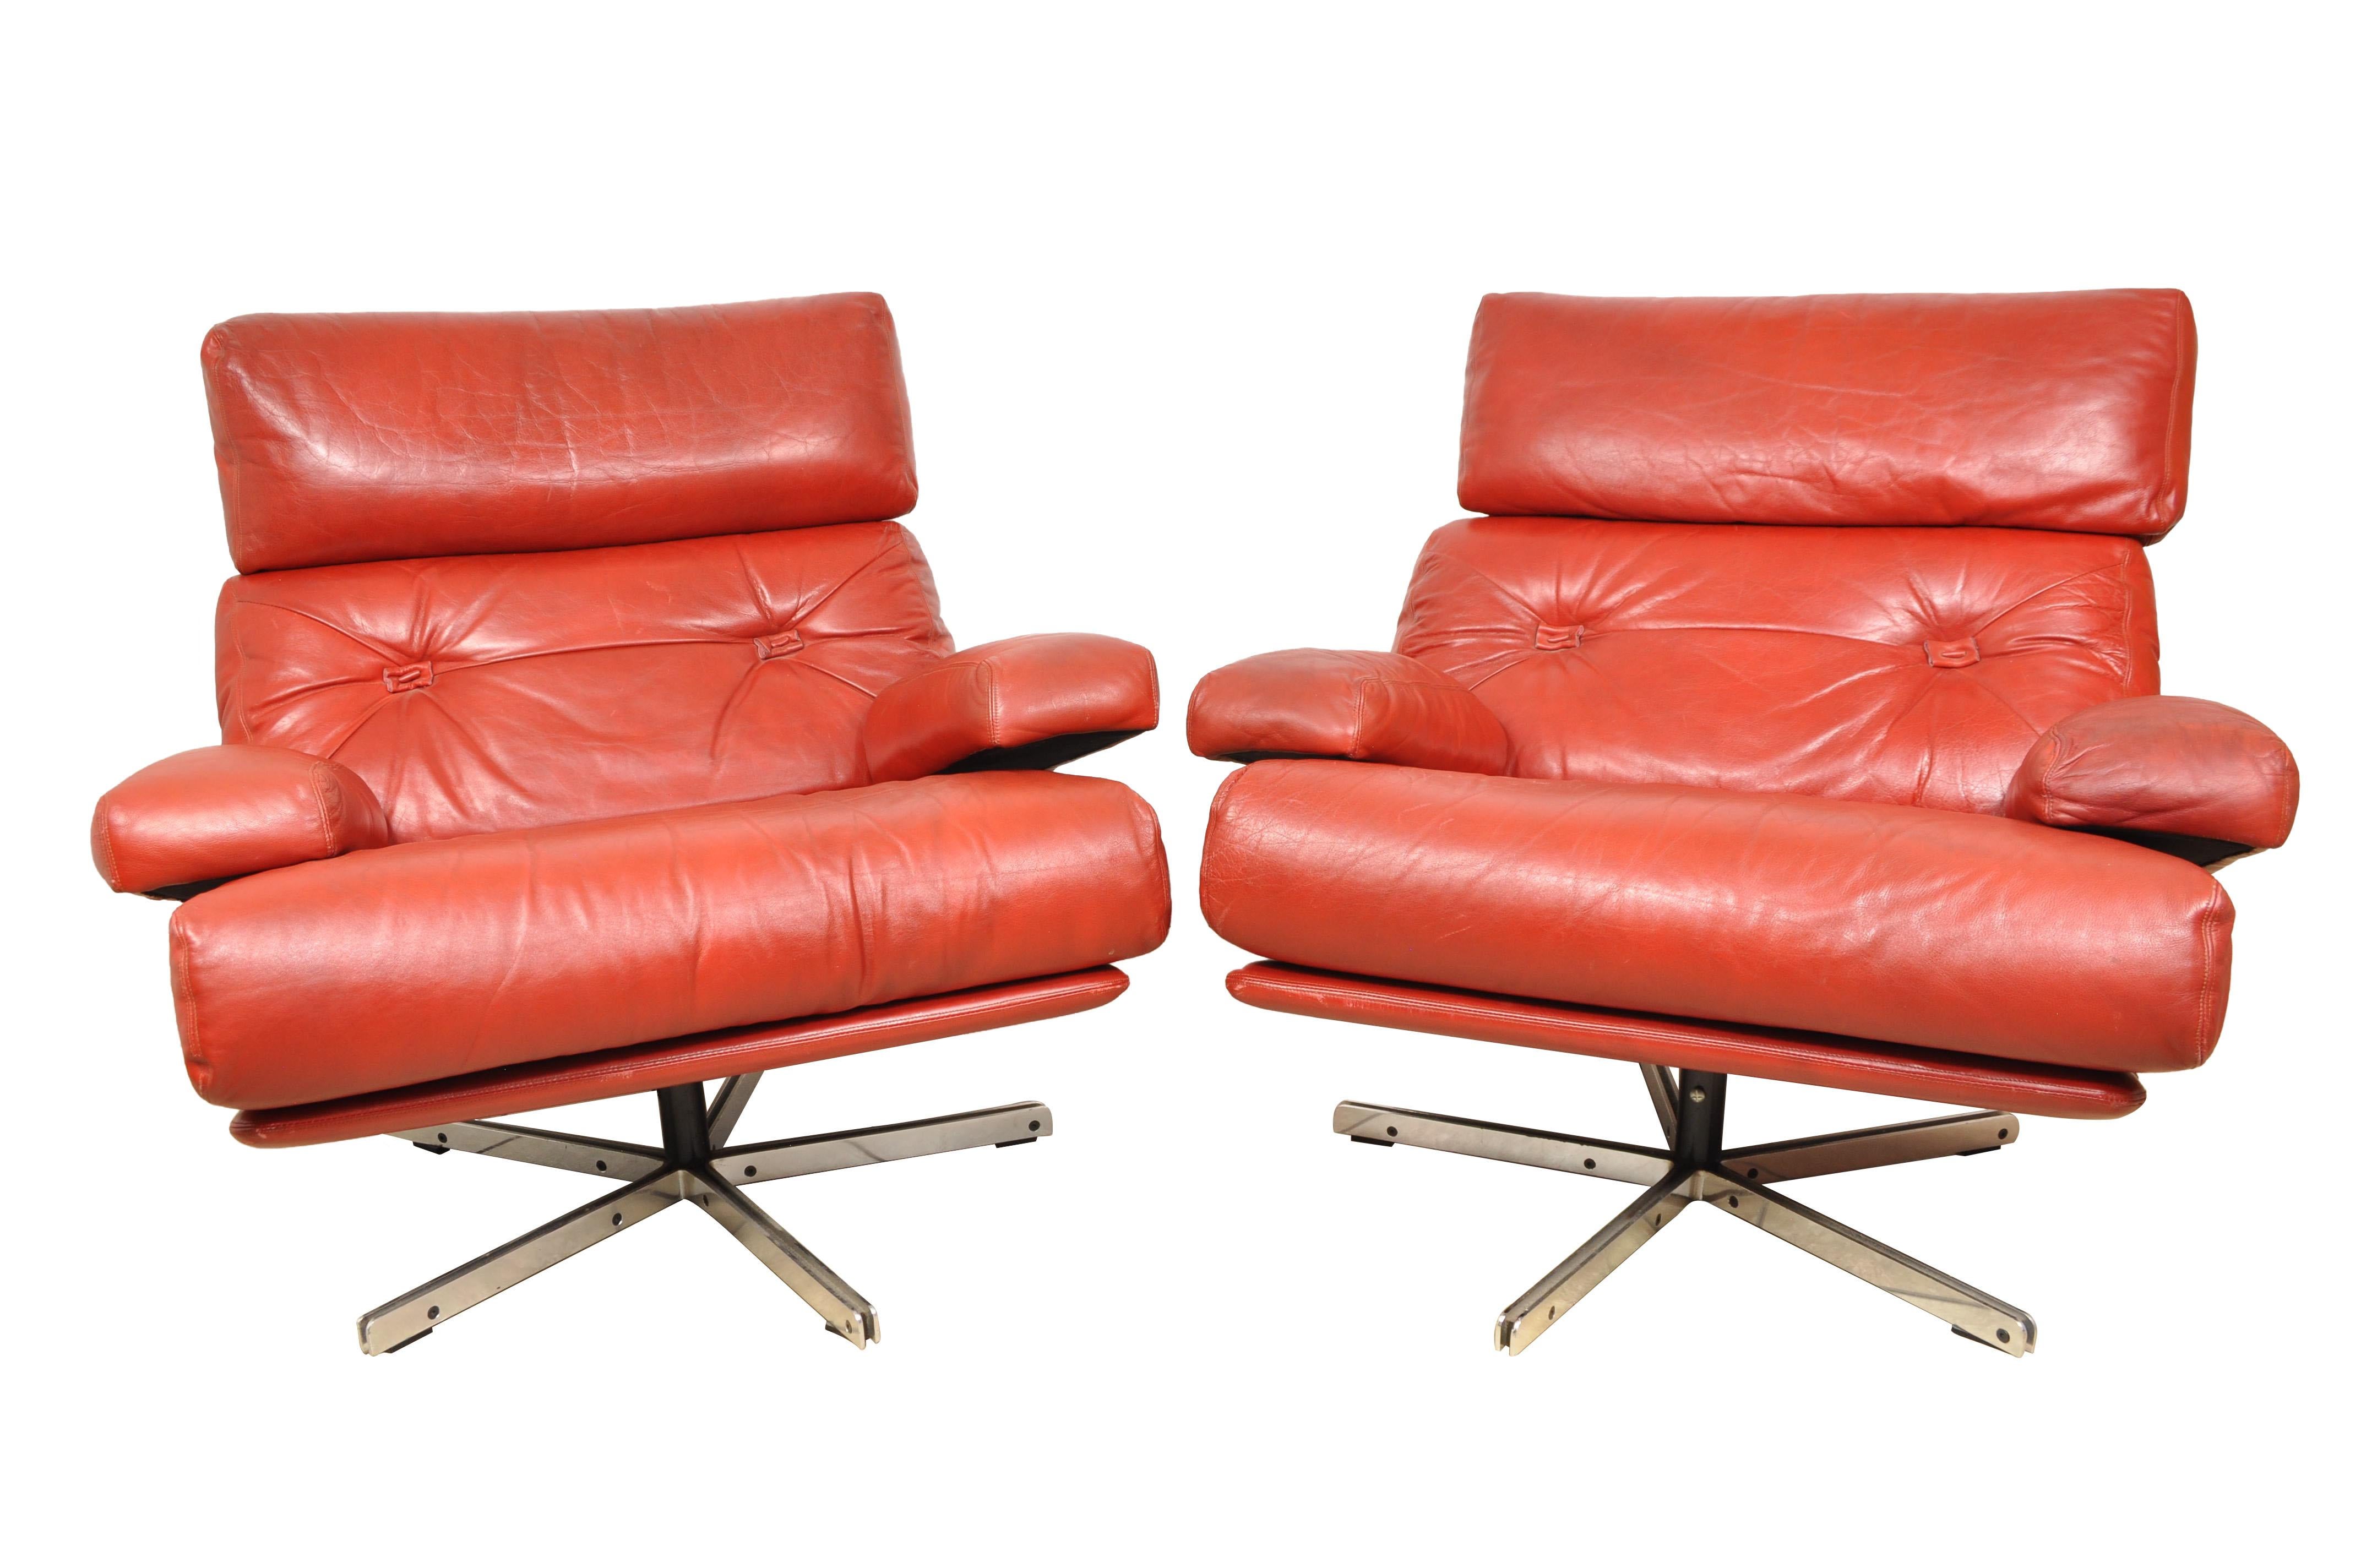 Pair of Italian Mid-Century Modern retro chairs red leather and chrome. Highest quality. These are large swivel lounge chairs upholstered in the original high quality red leather.